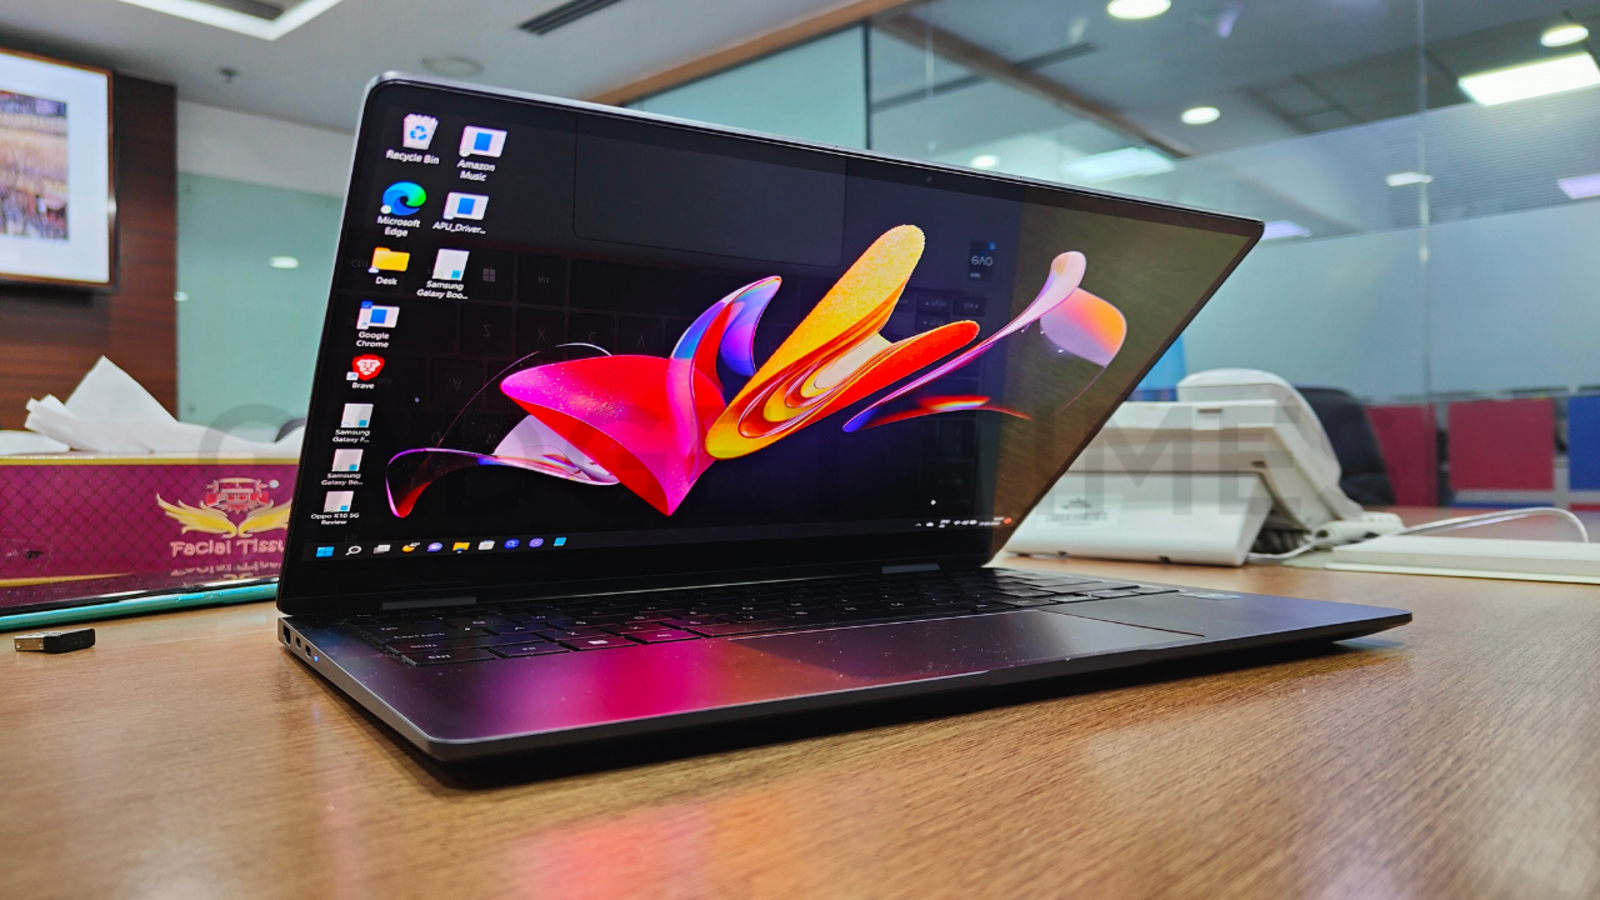 Samsung Galaxy Book 3 Pro 360 review: Third time's a charm